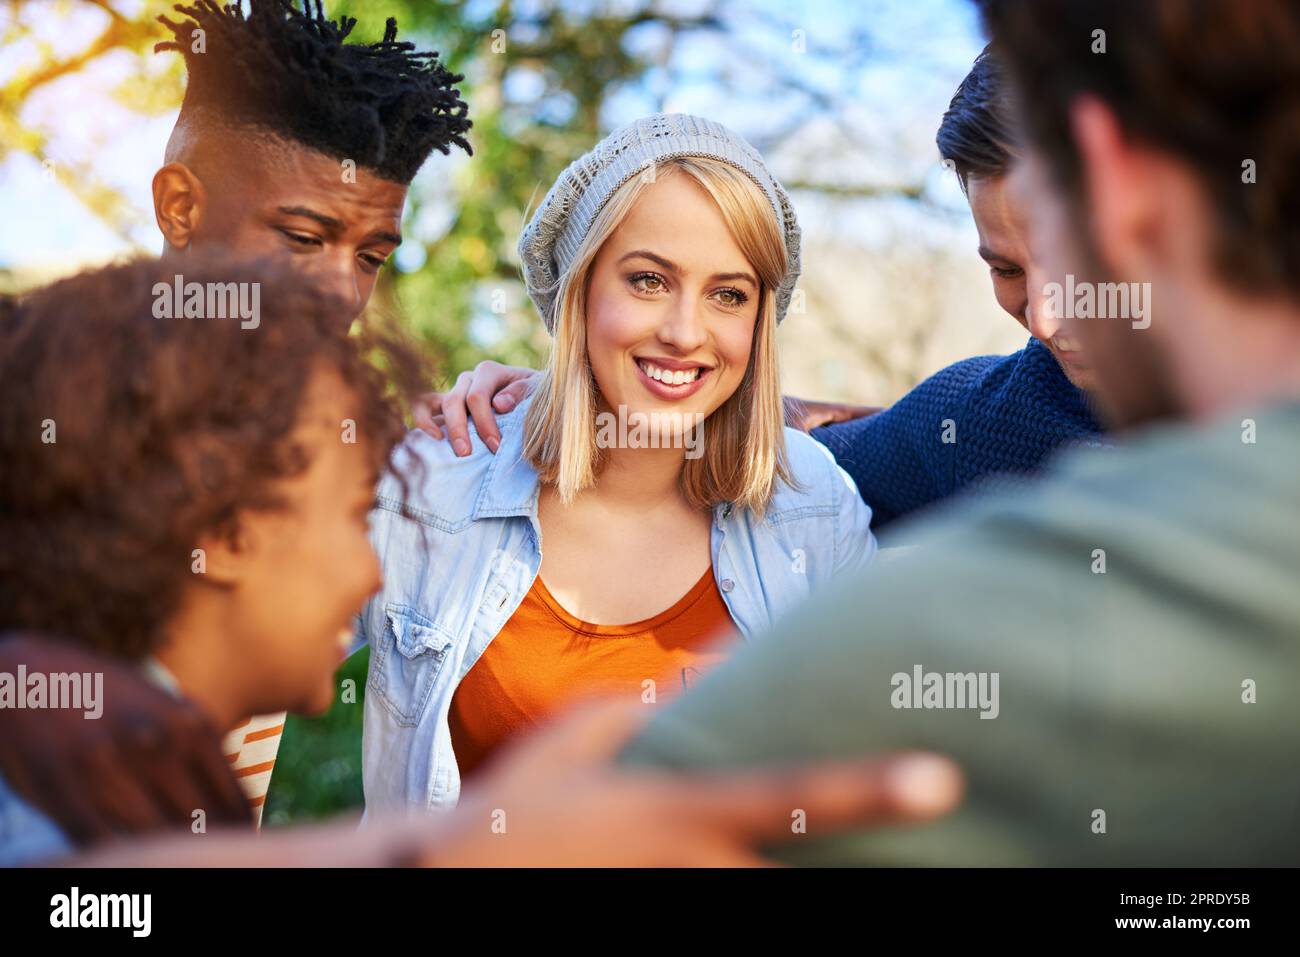 Our teamwork could make anything work. a group of students hanging out together outside on campus. Stock Photo